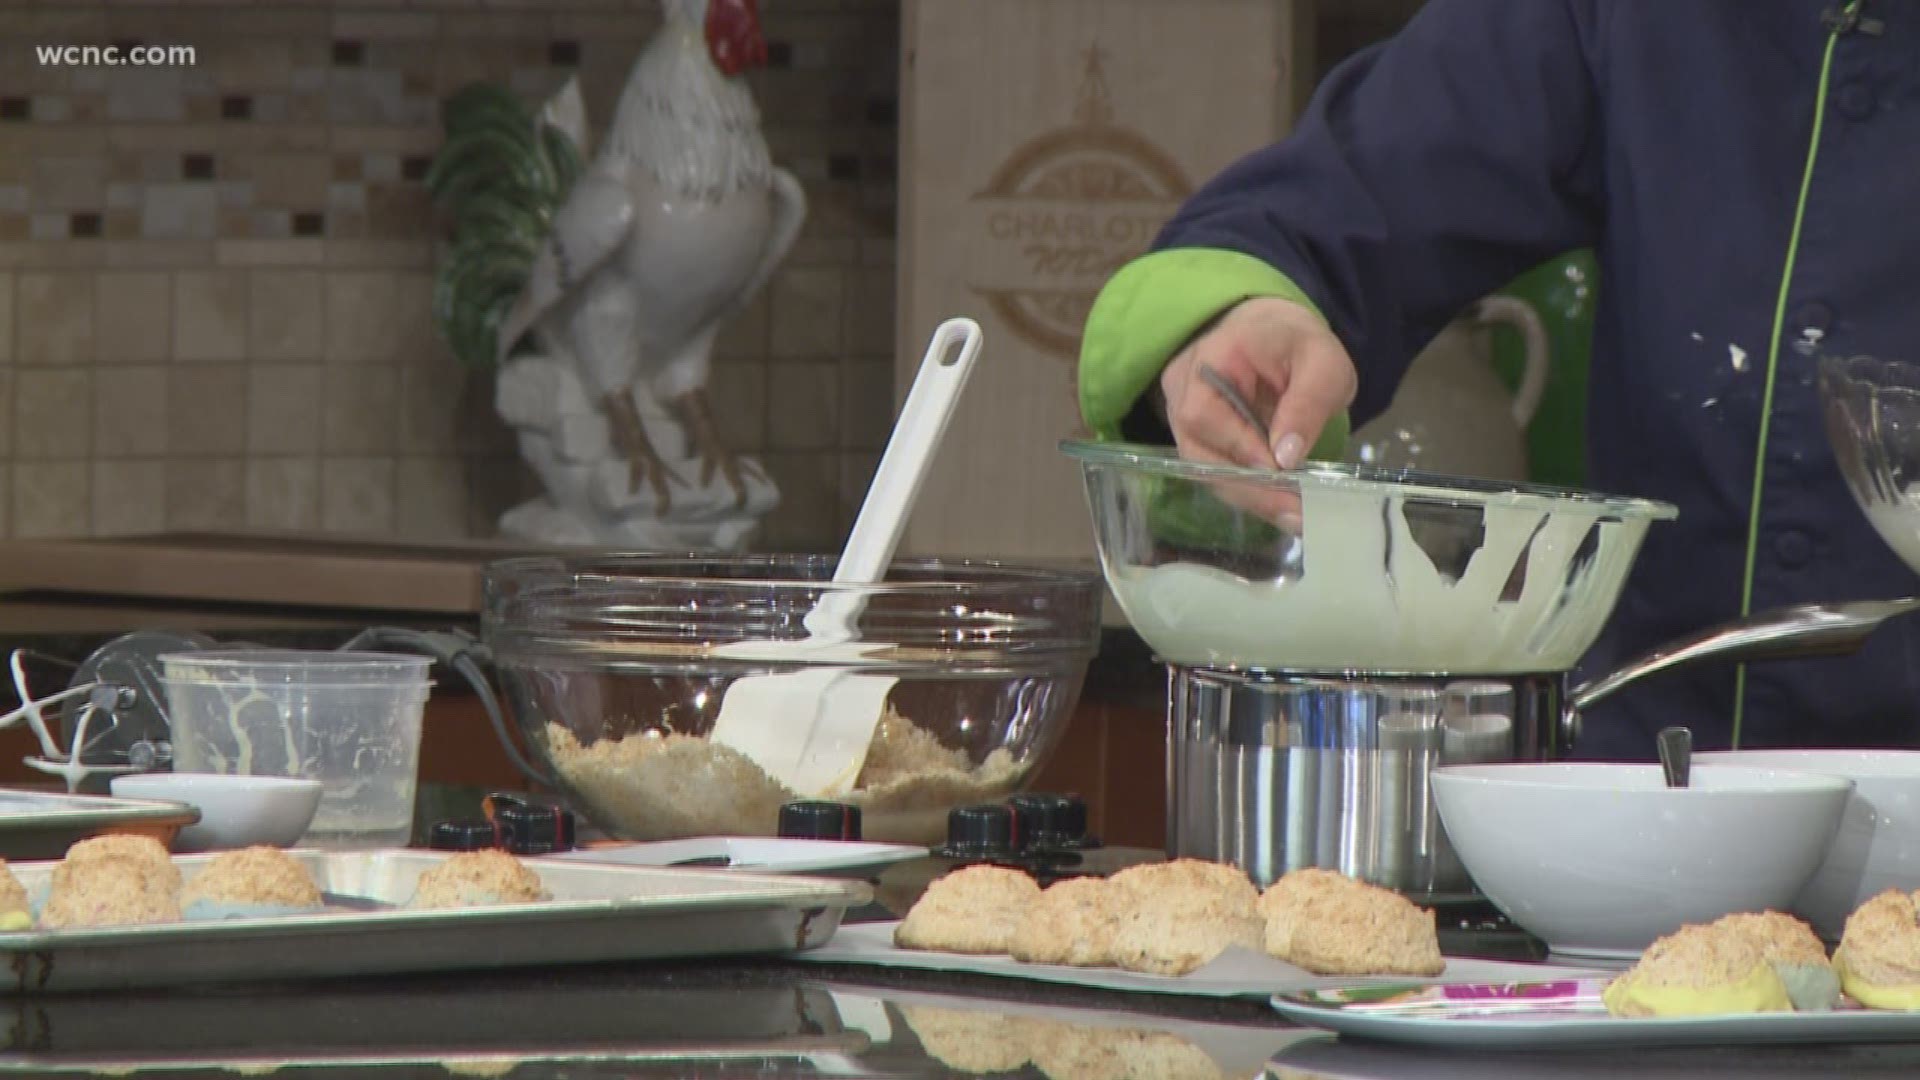 Recipe for coconut macaroons from chef Alyssa